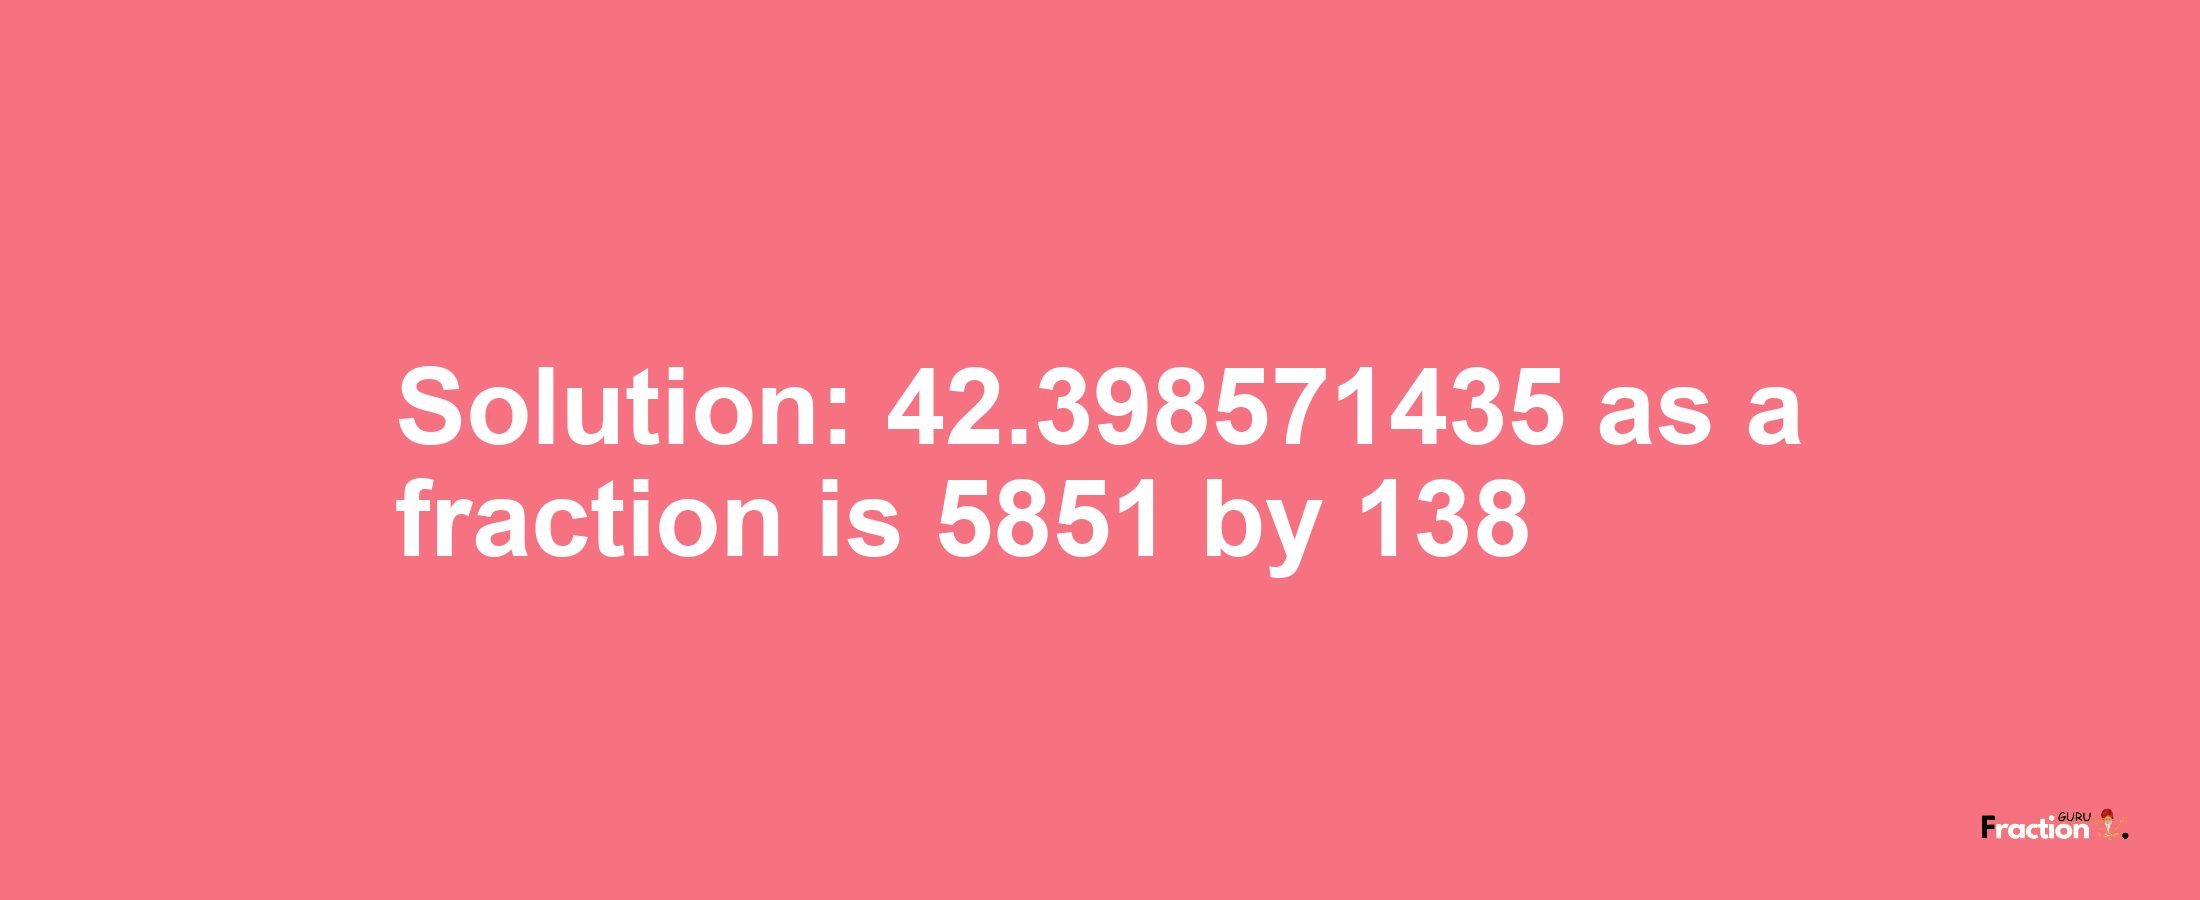 Solution:42.398571435 as a fraction is 5851/138